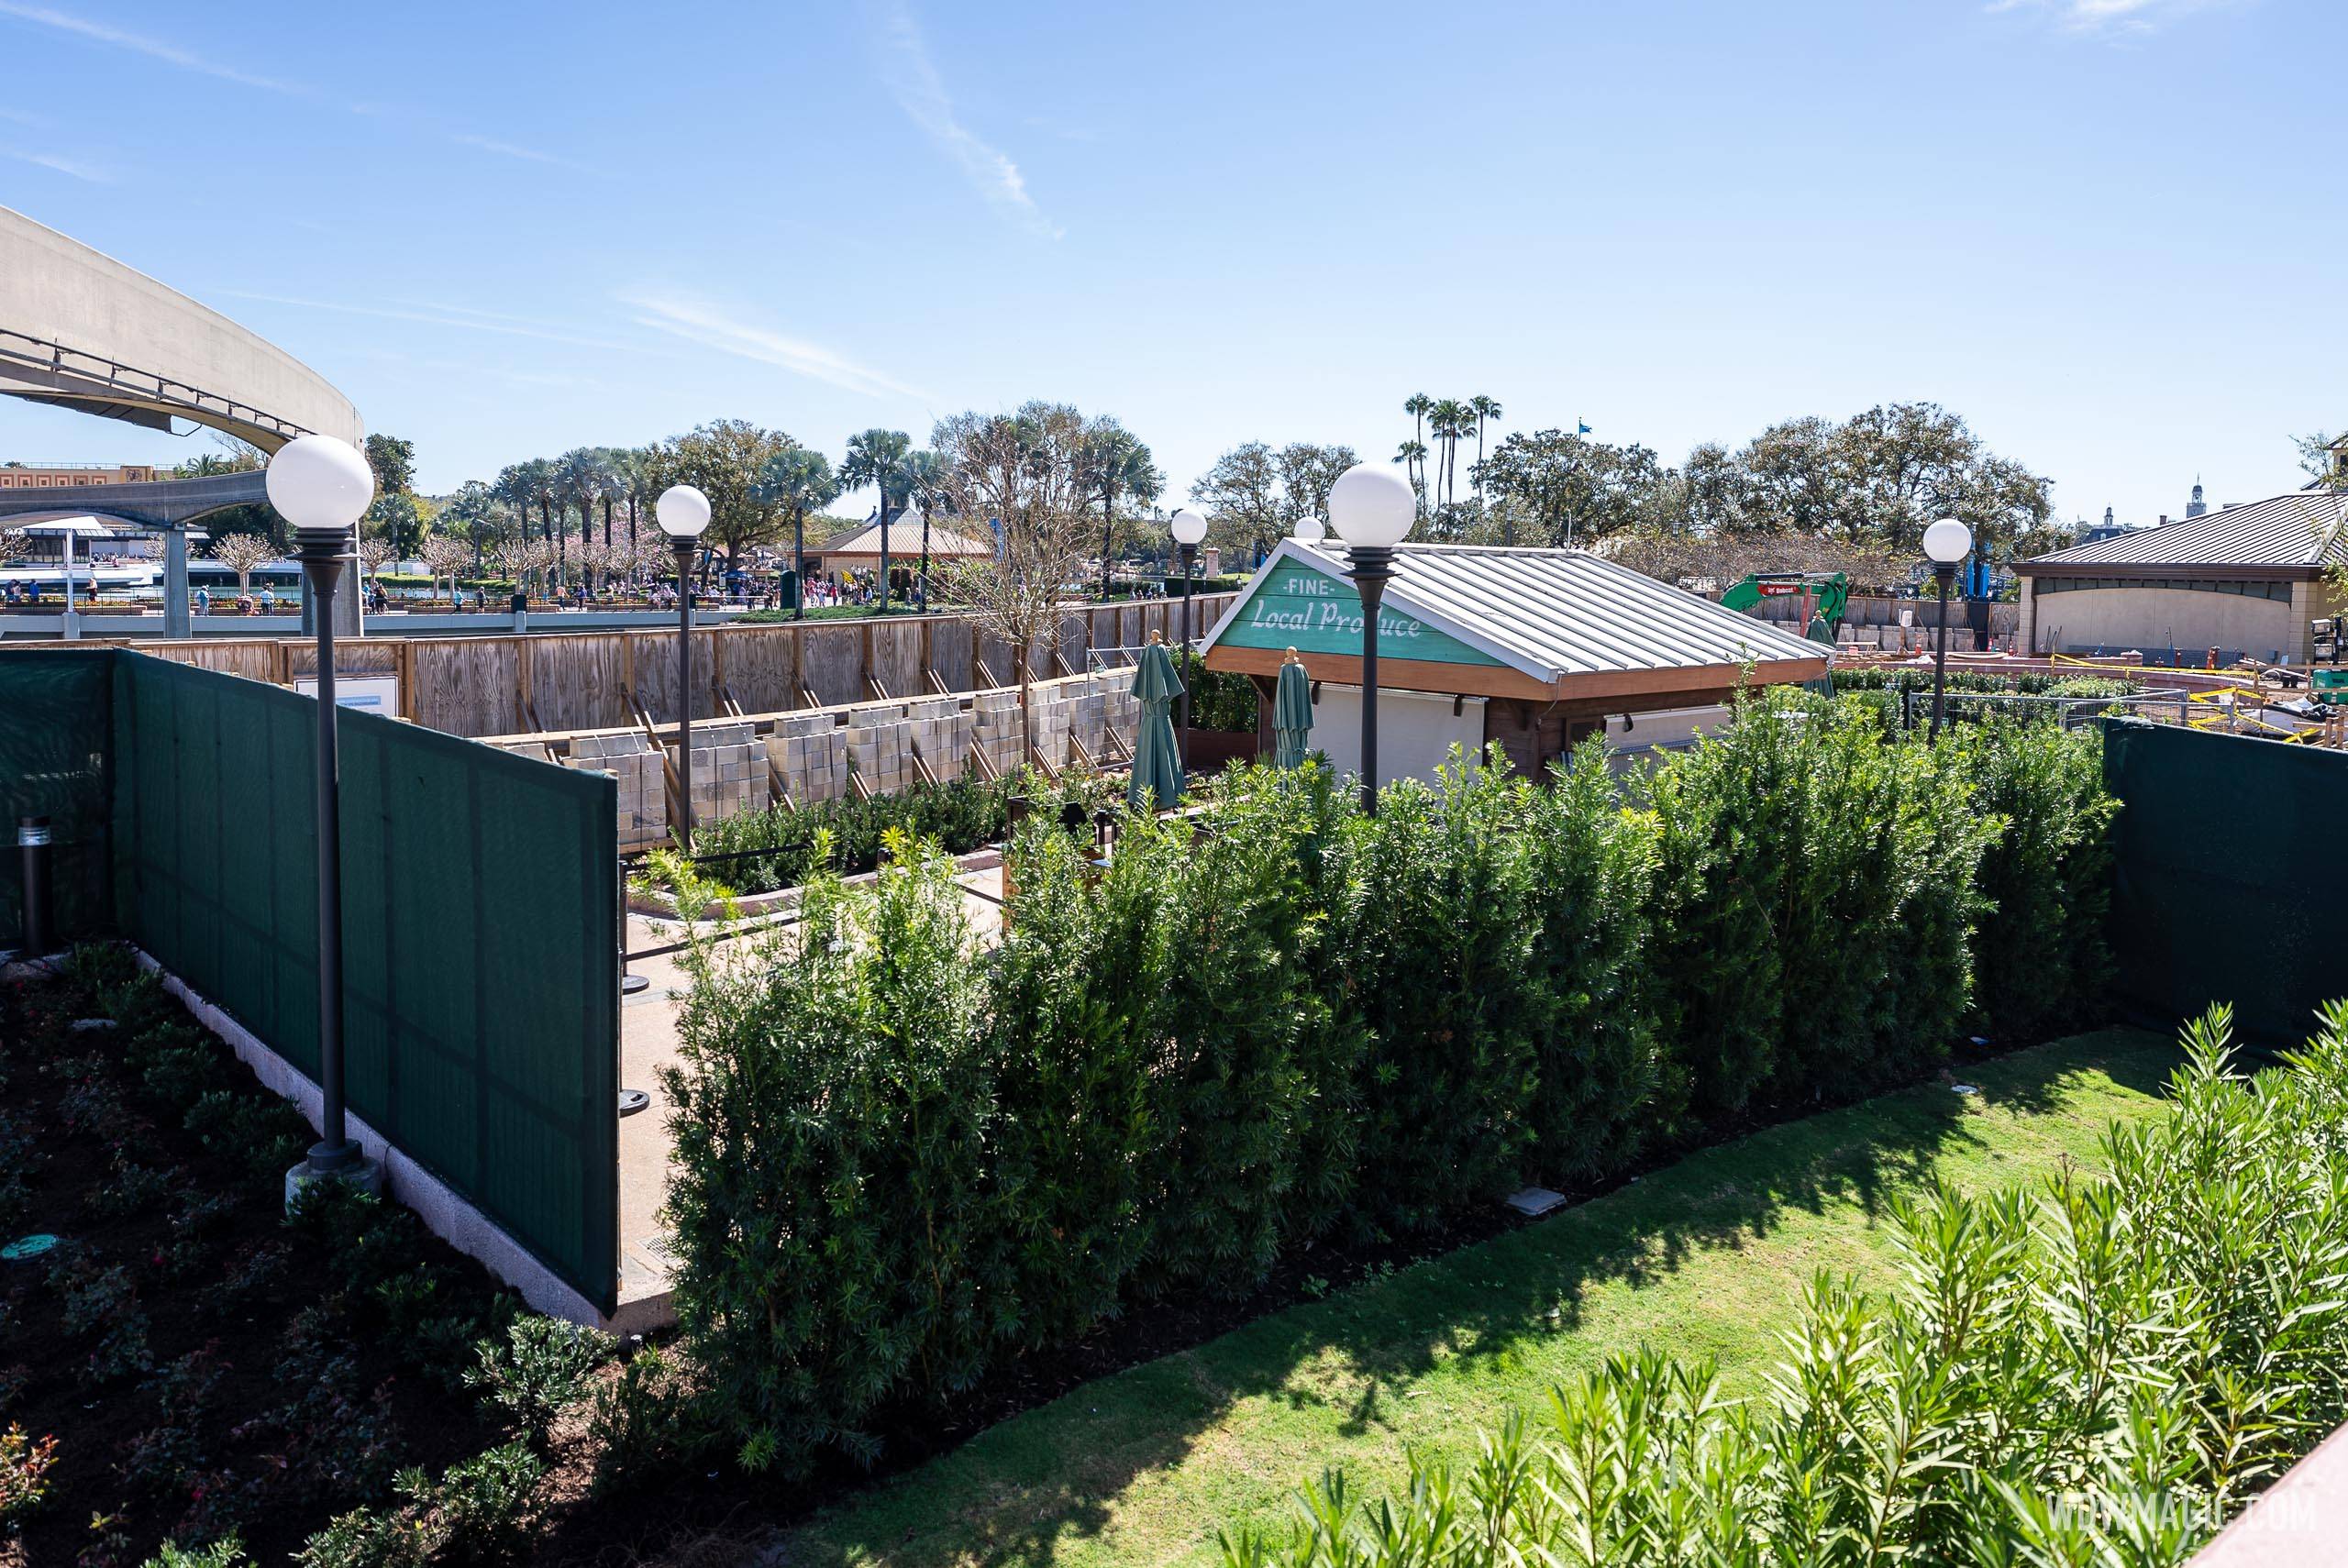 Florida Fresh Outdoor Kitchen moves into new festival area at EPCOT